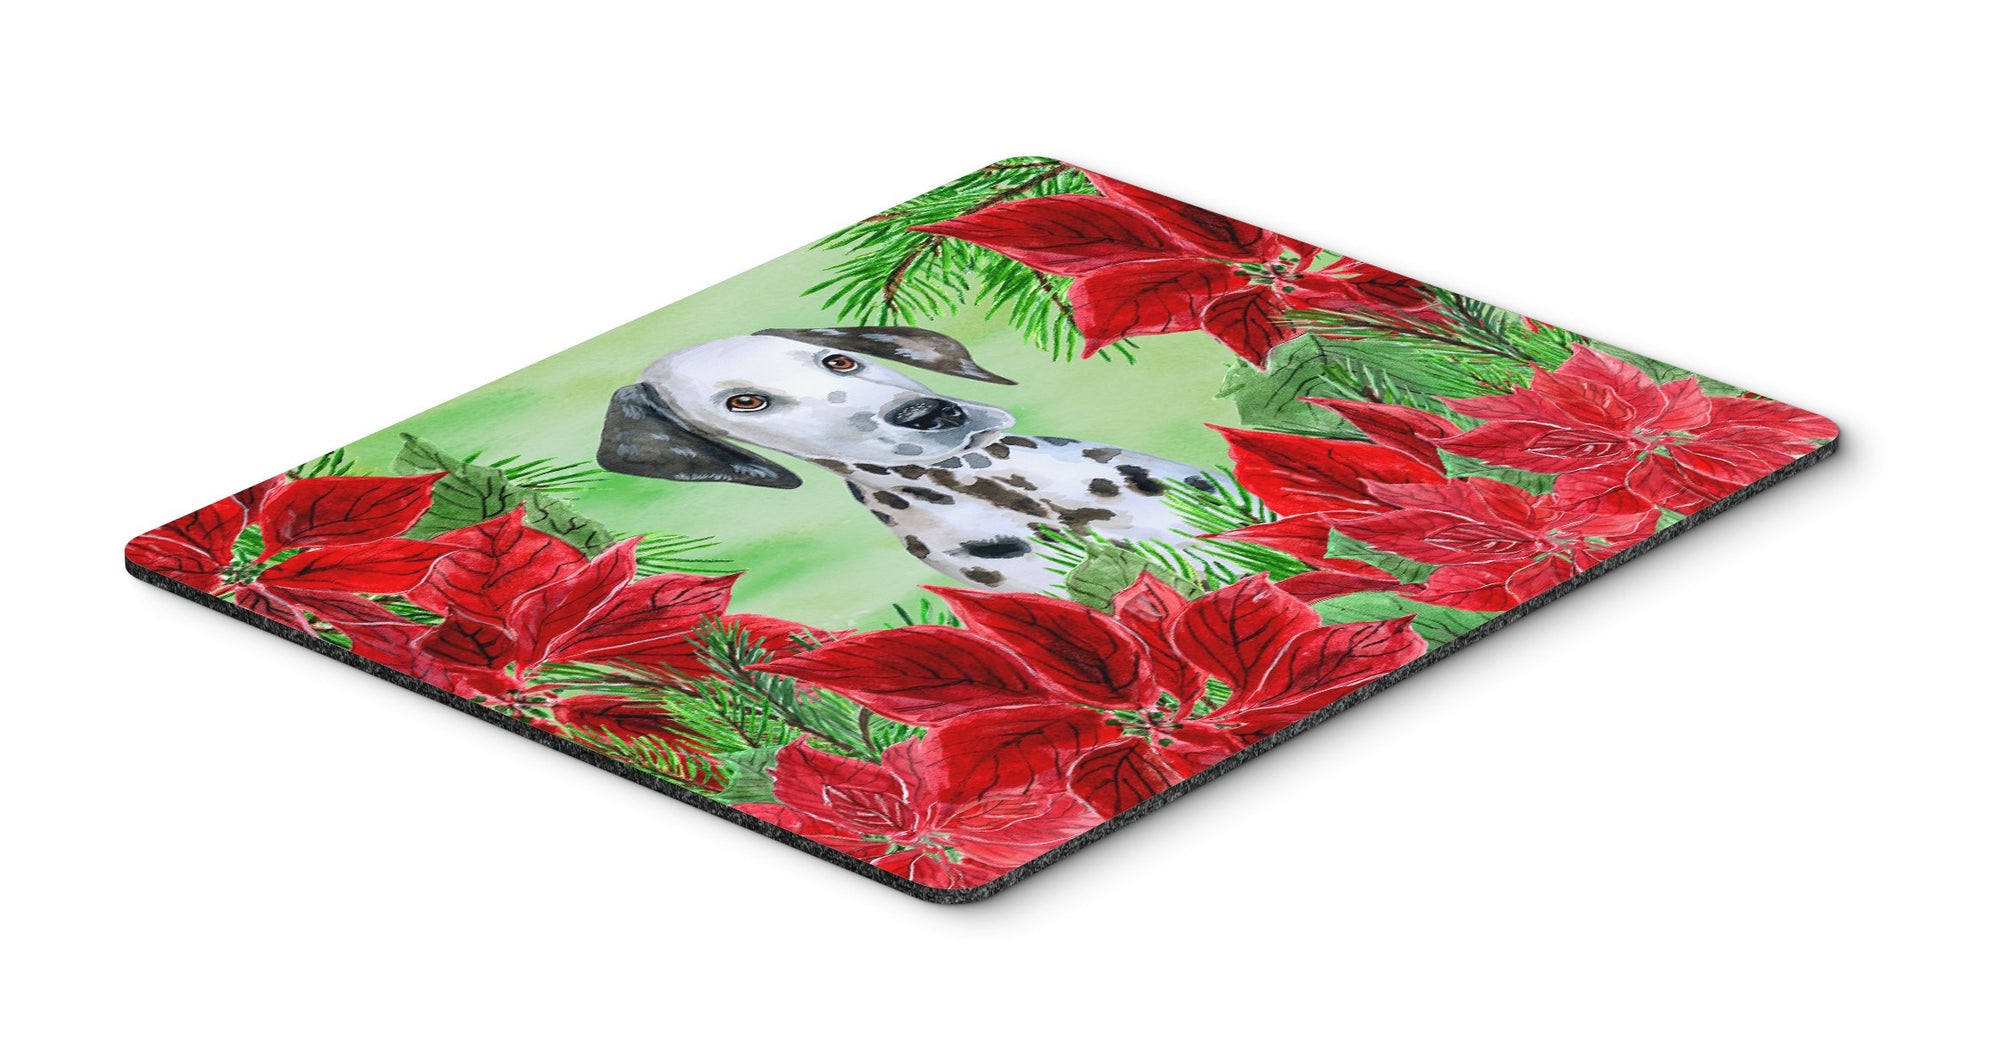 Dalmatian Puppy Poinsettas Mouse Pad, Hot Pad or Trivet CK1356MP by Caroline's Treasures